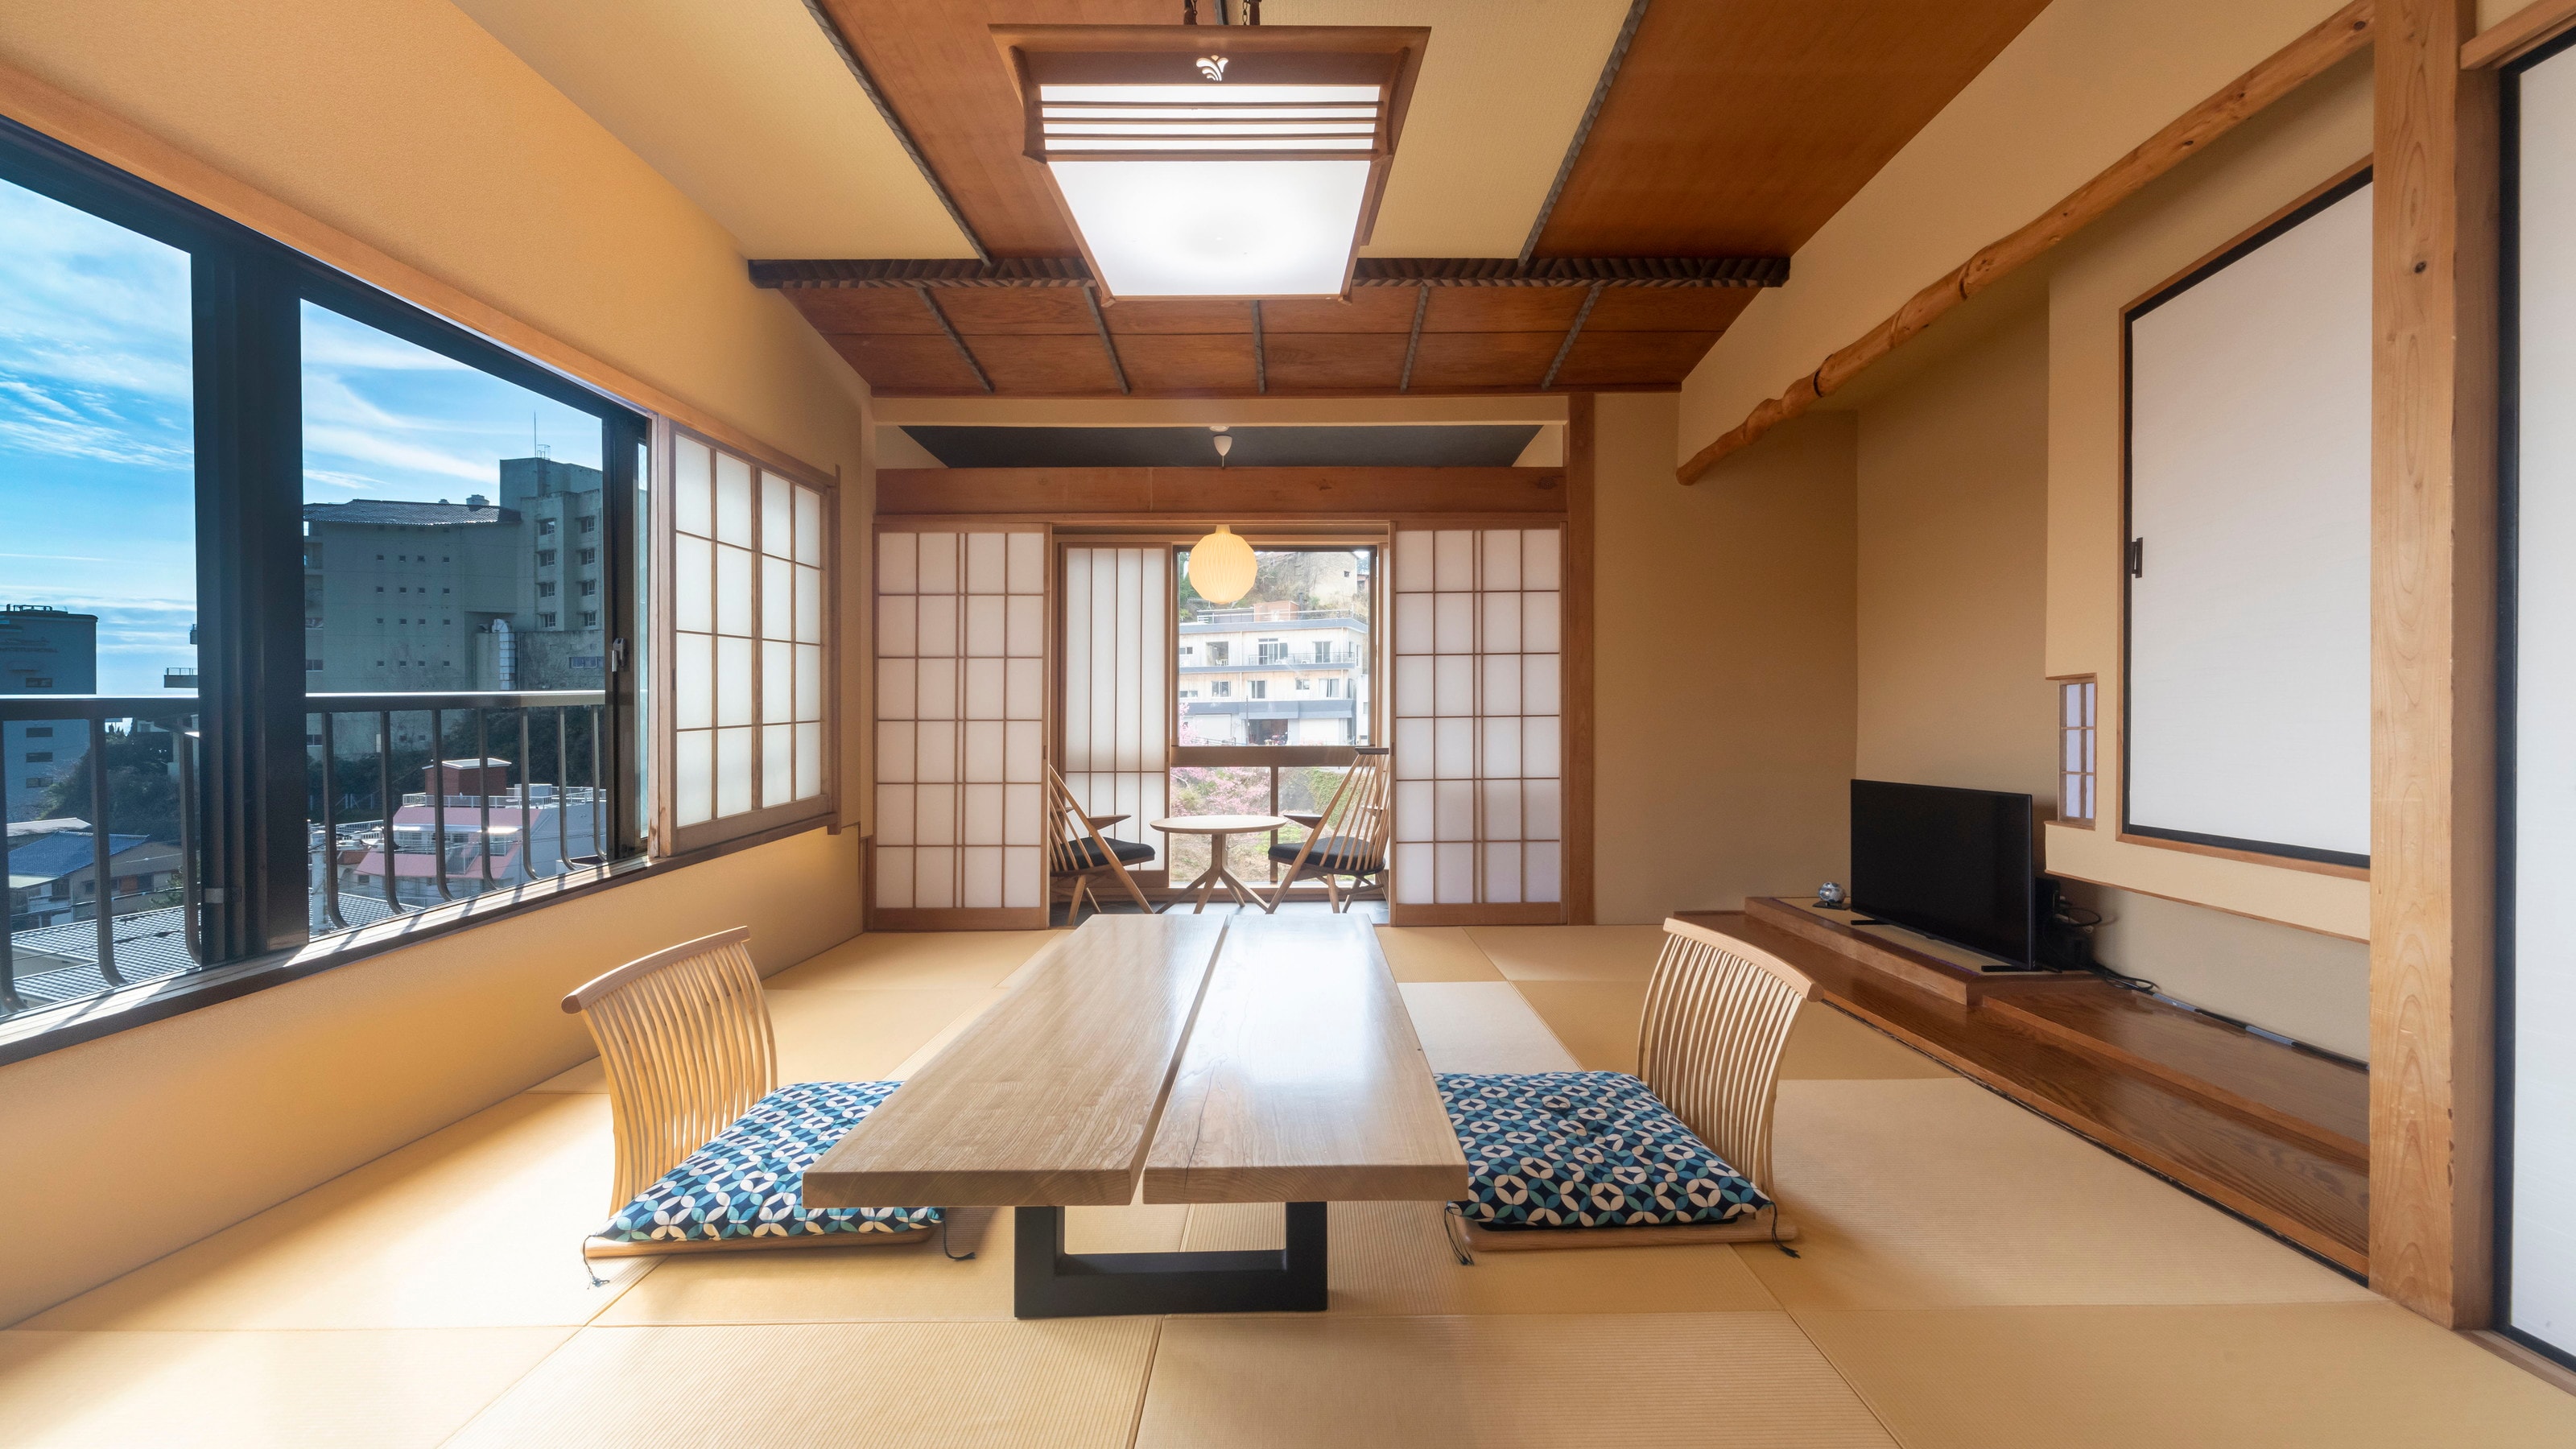 [Small] Japanese style room with 10 tatami mats